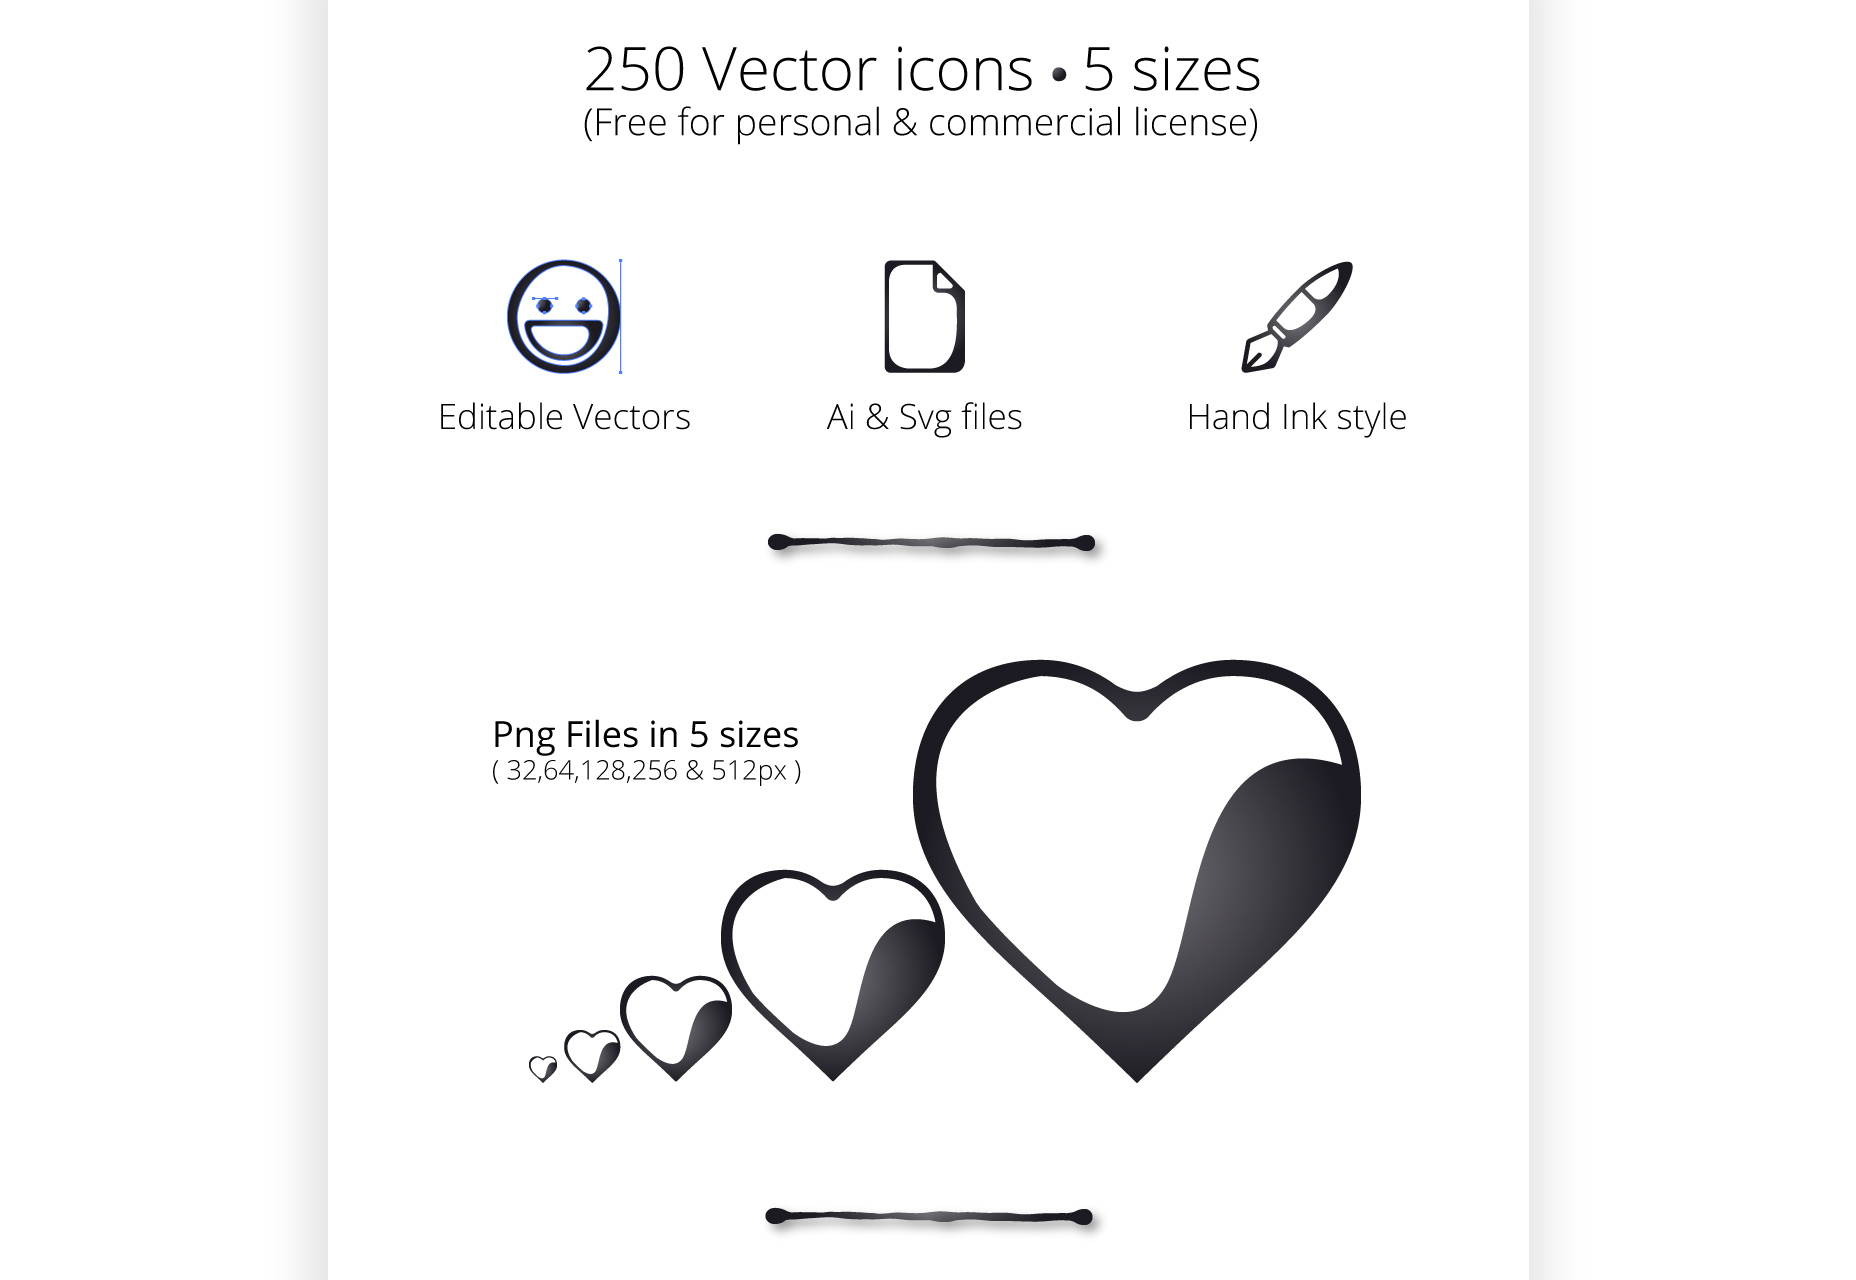 Inkallicons: Vector Ink Line Icons